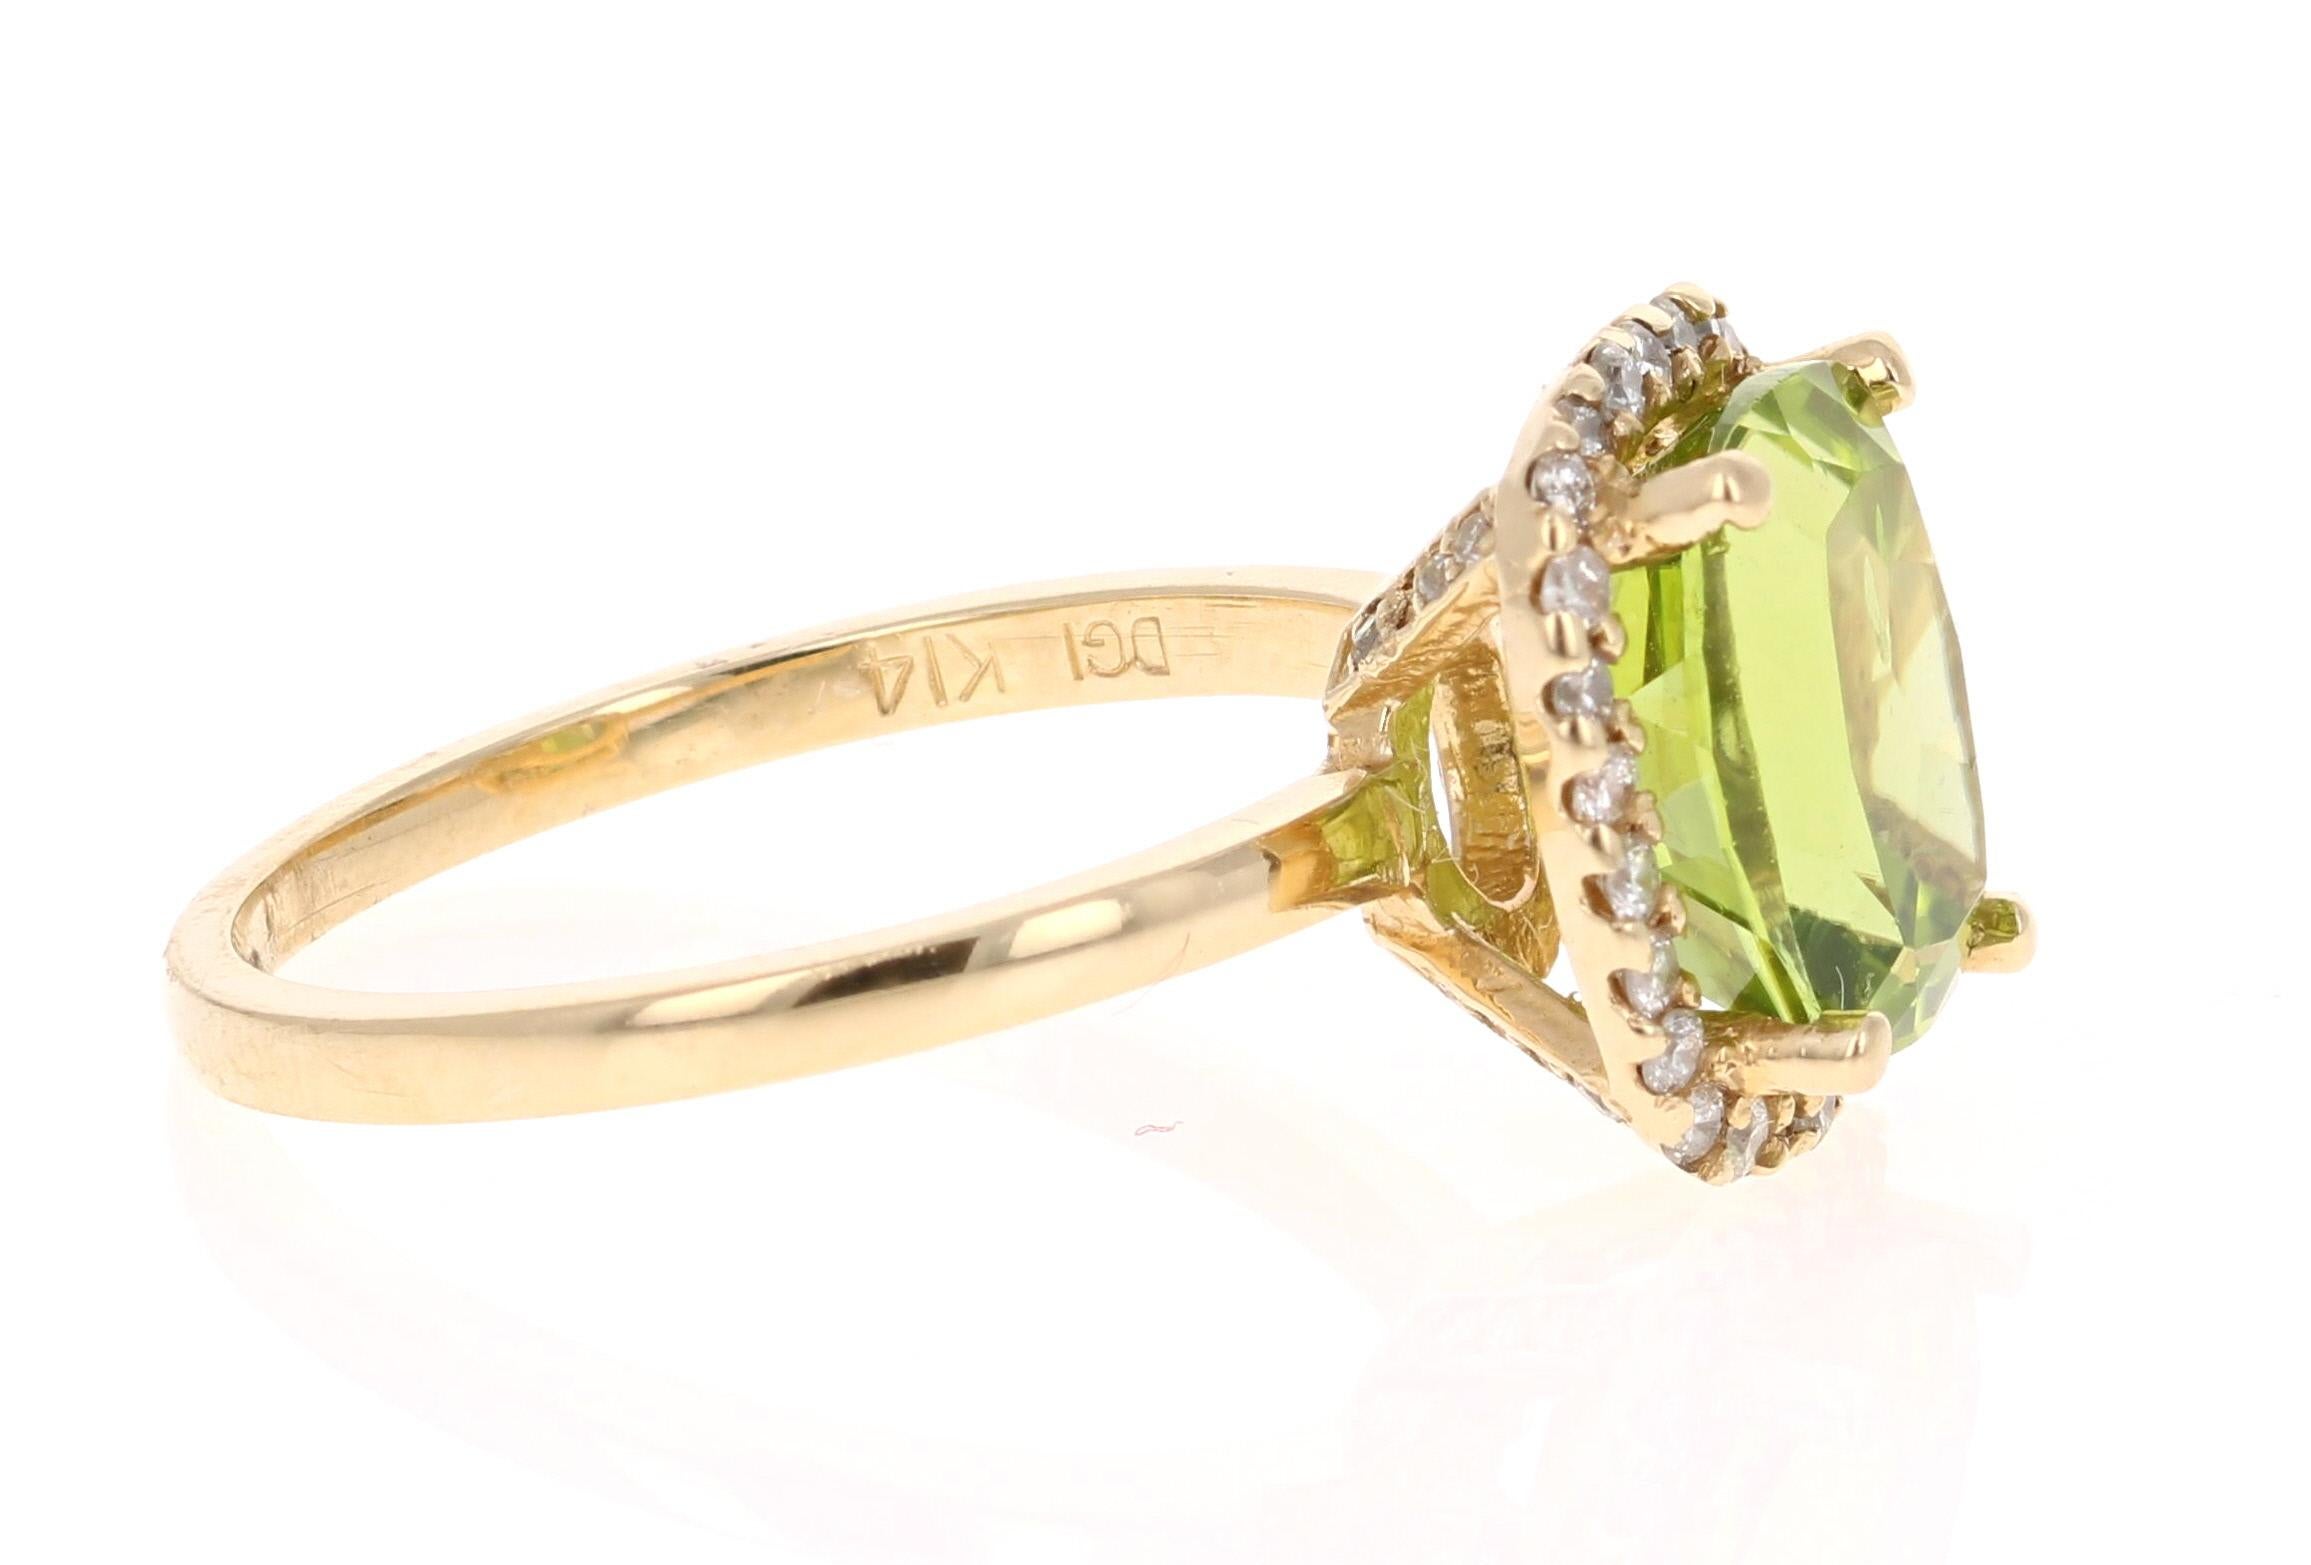 Bright, Beautiful and Bling! 

This Peridot and Diamond Ring has a 3.72 Carat Cushion Cut Peridot and has a halo of 42 Round Cut Diamonds weighing 0.33 Carats. The total carat weight of the ring is 4.05 Carats. 

It is set in 14 Karat Yellow Gold